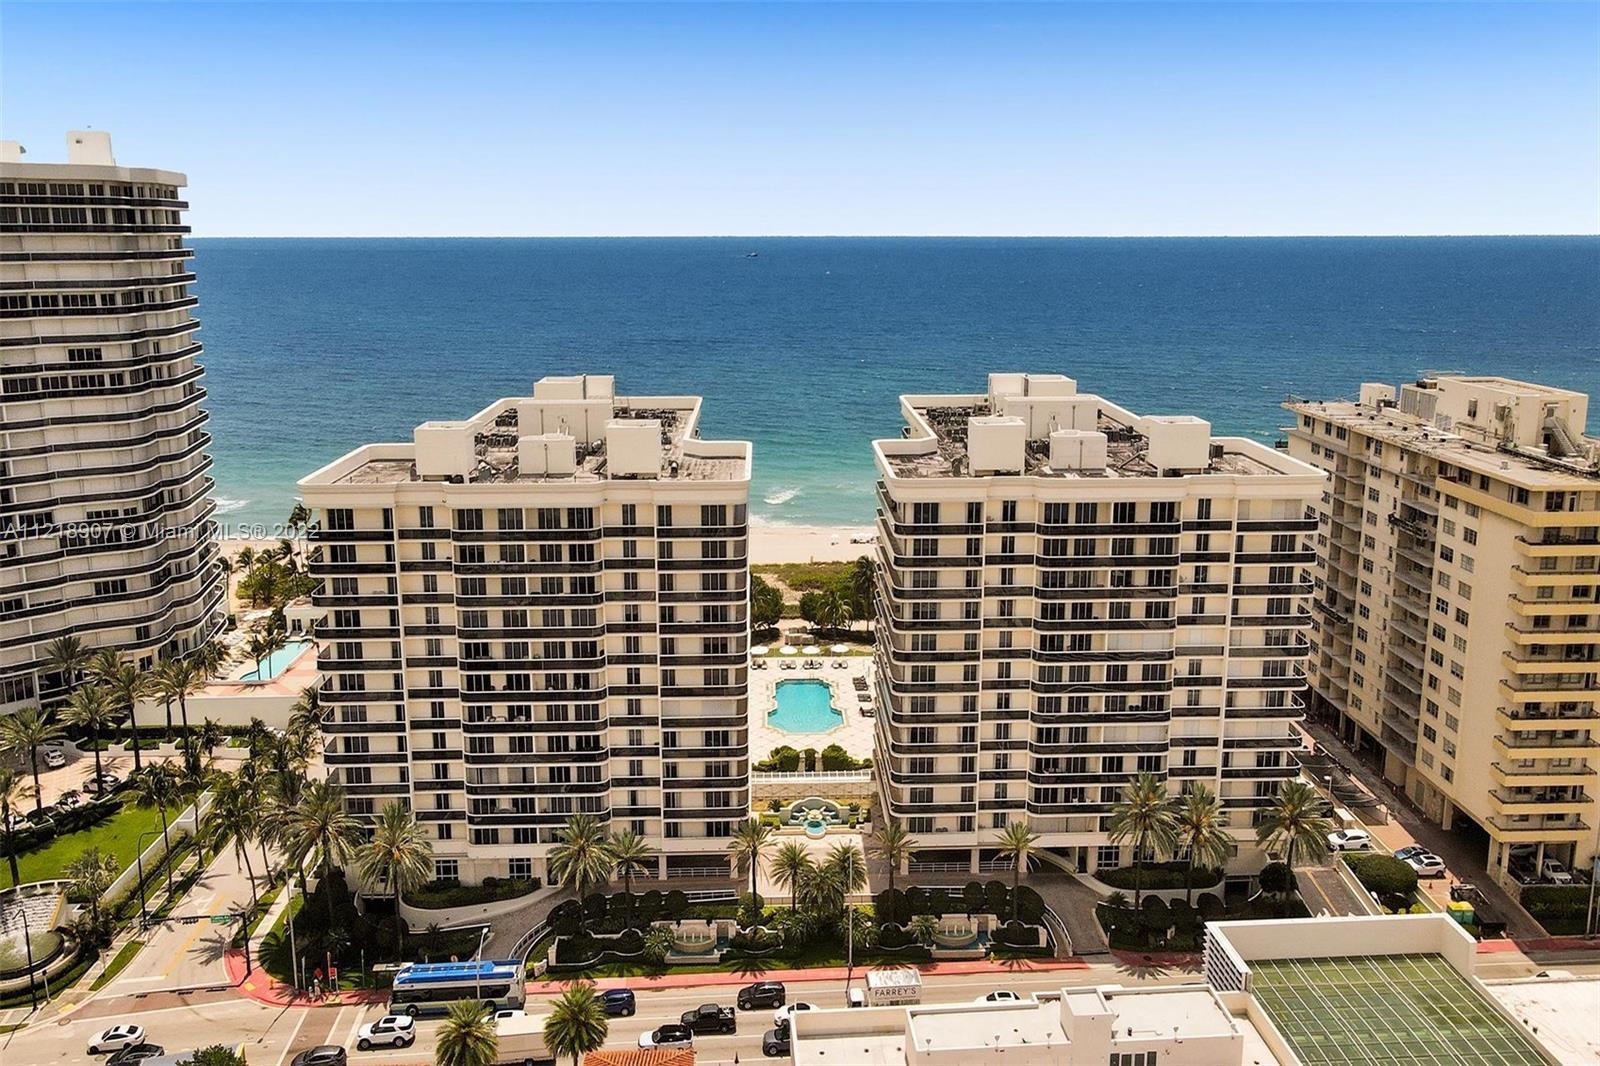 Enjoy ocean views from this beautiful spacious condo featuring an open  floorplan, 1,740 SF, a large